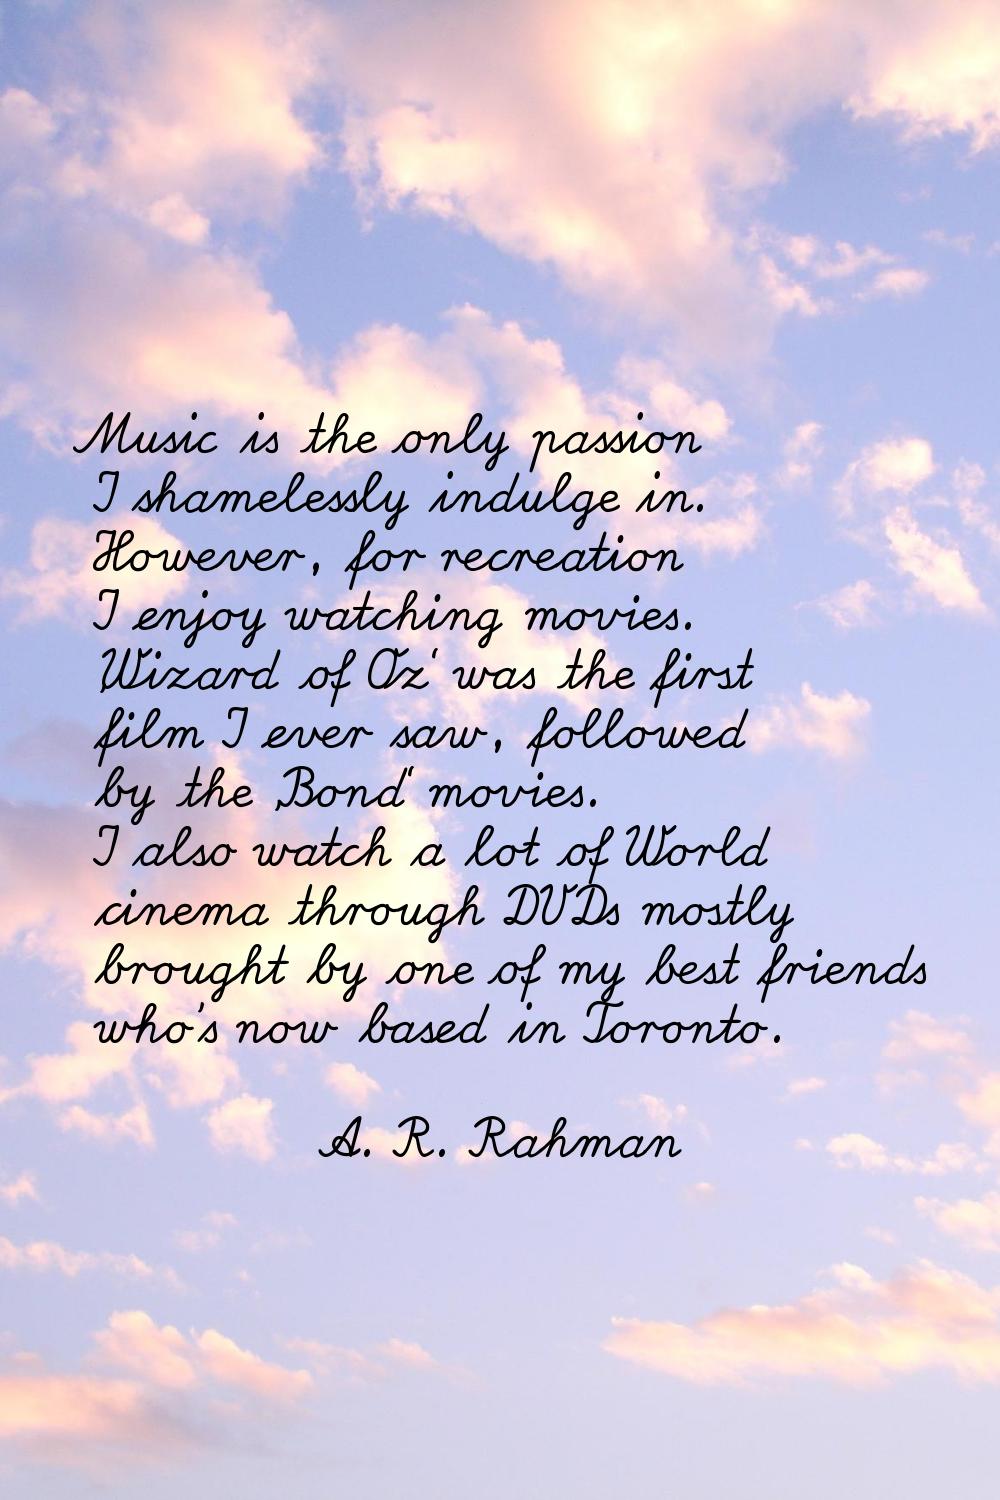 Music is the only passion I shamelessly indulge in. However, for recreation I enjoy watching movies